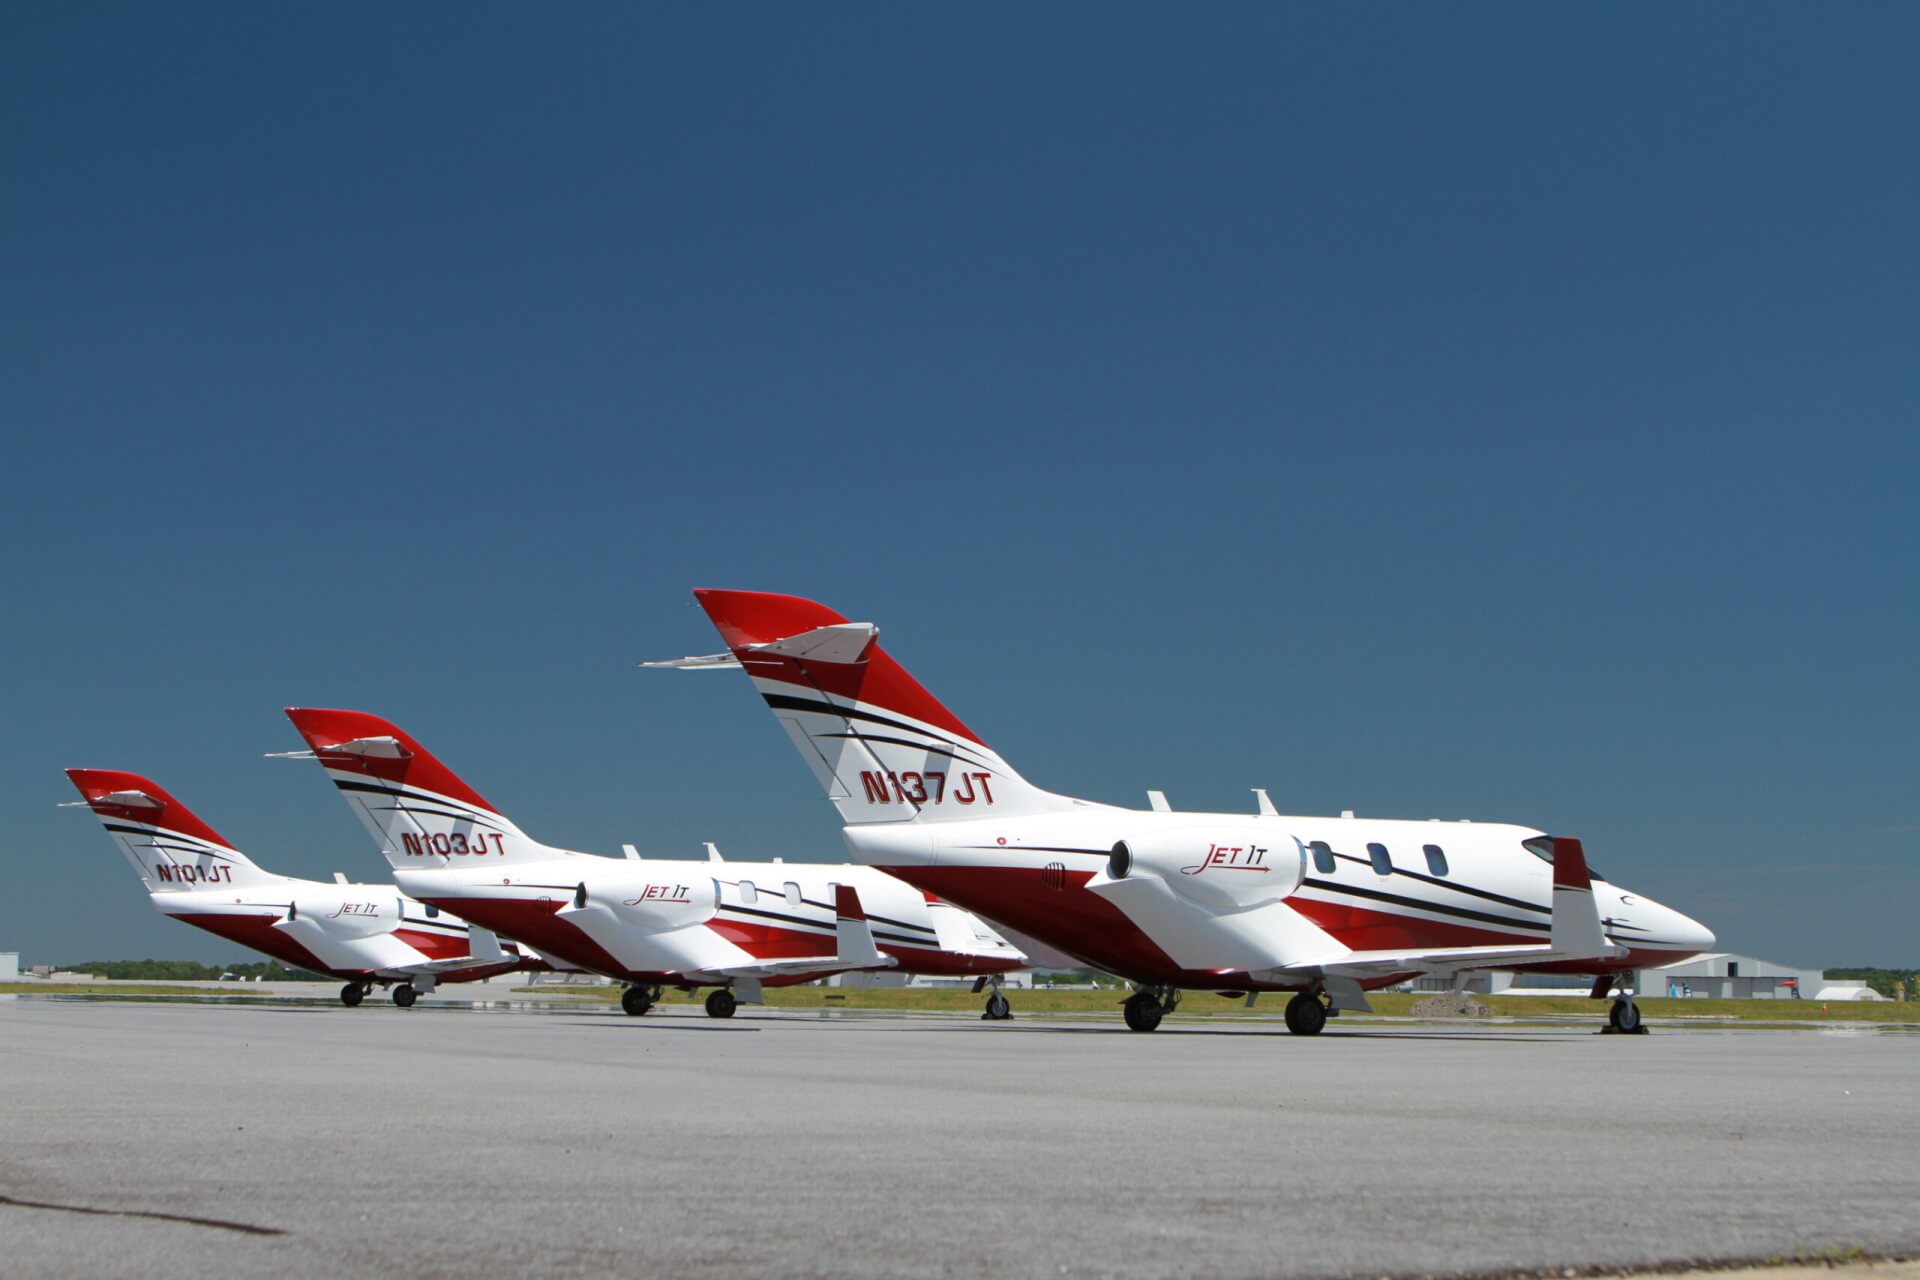 Jet It and JetClub thrive; adds 13 new aircraft in 2021